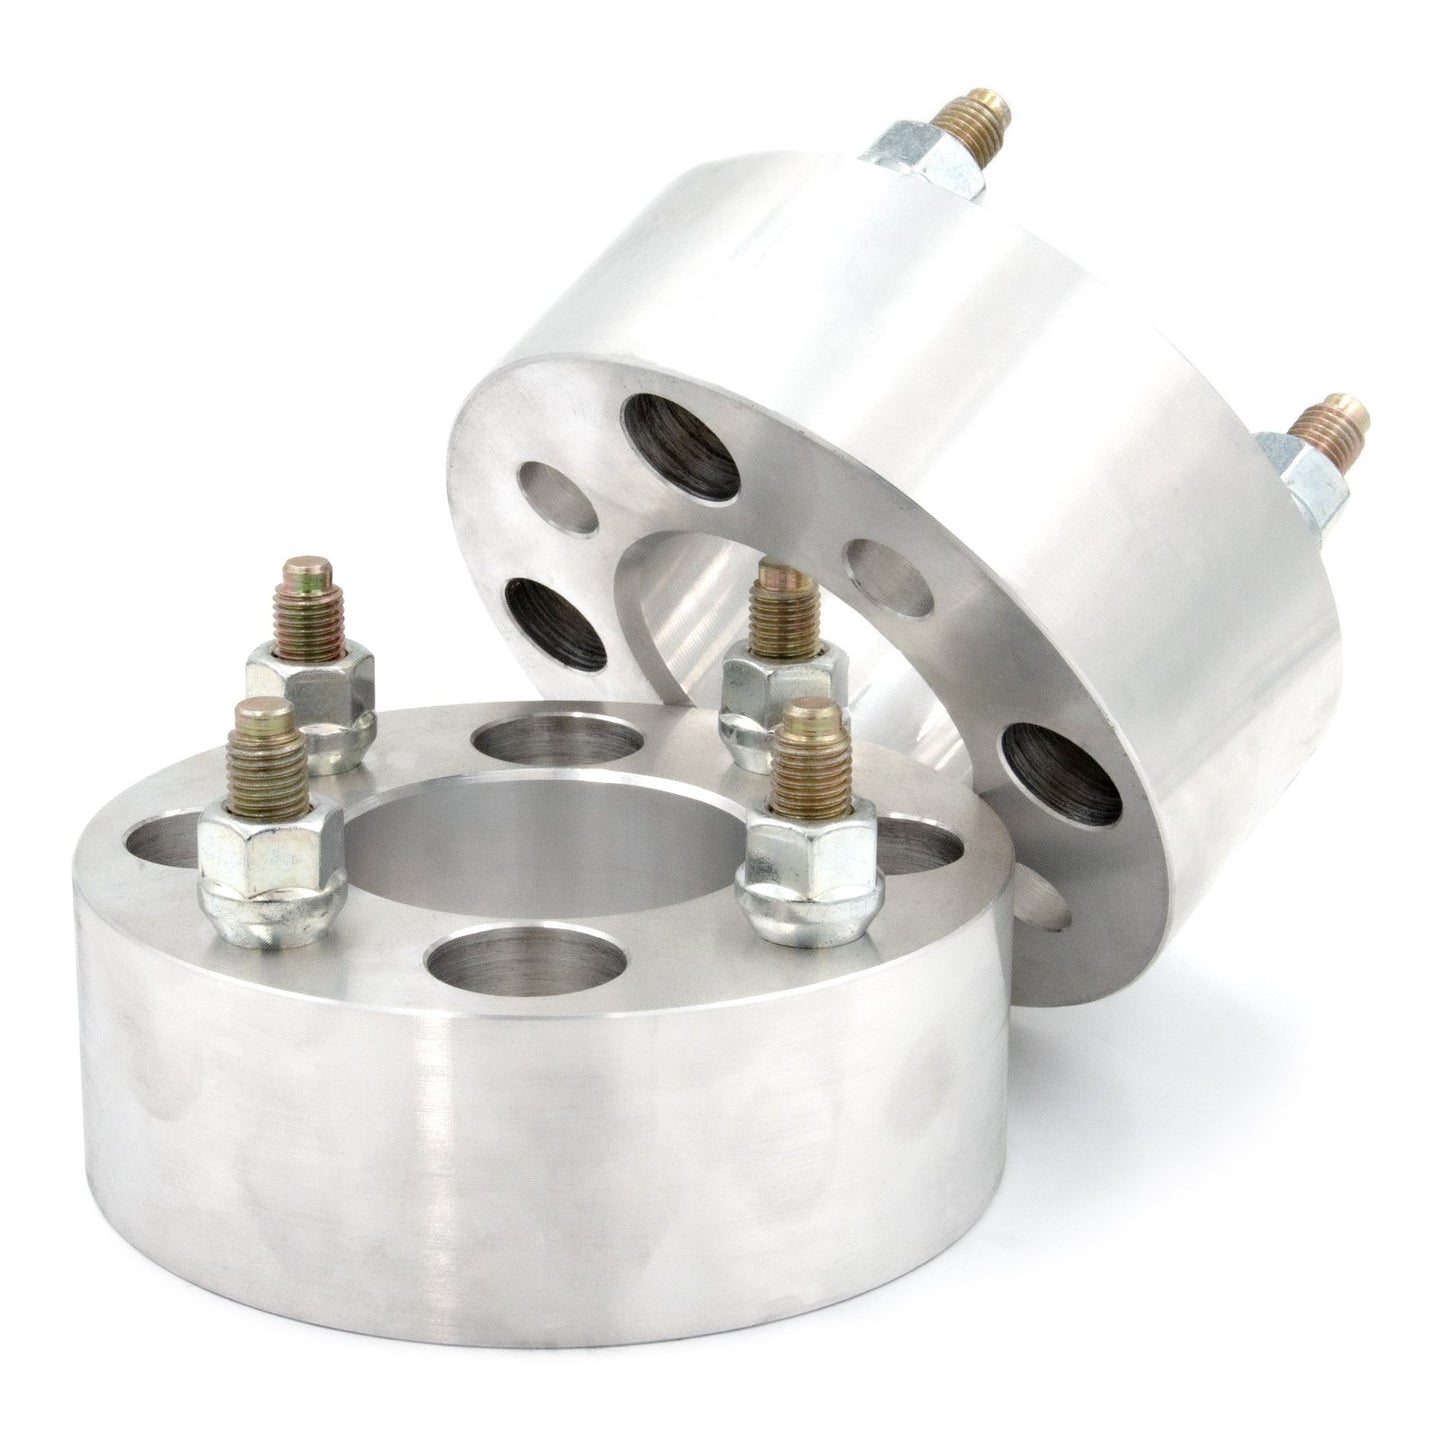 4x4.5" to 4x137 Wheel Spacer/Adapter - Thickness: 3/4"- 4"